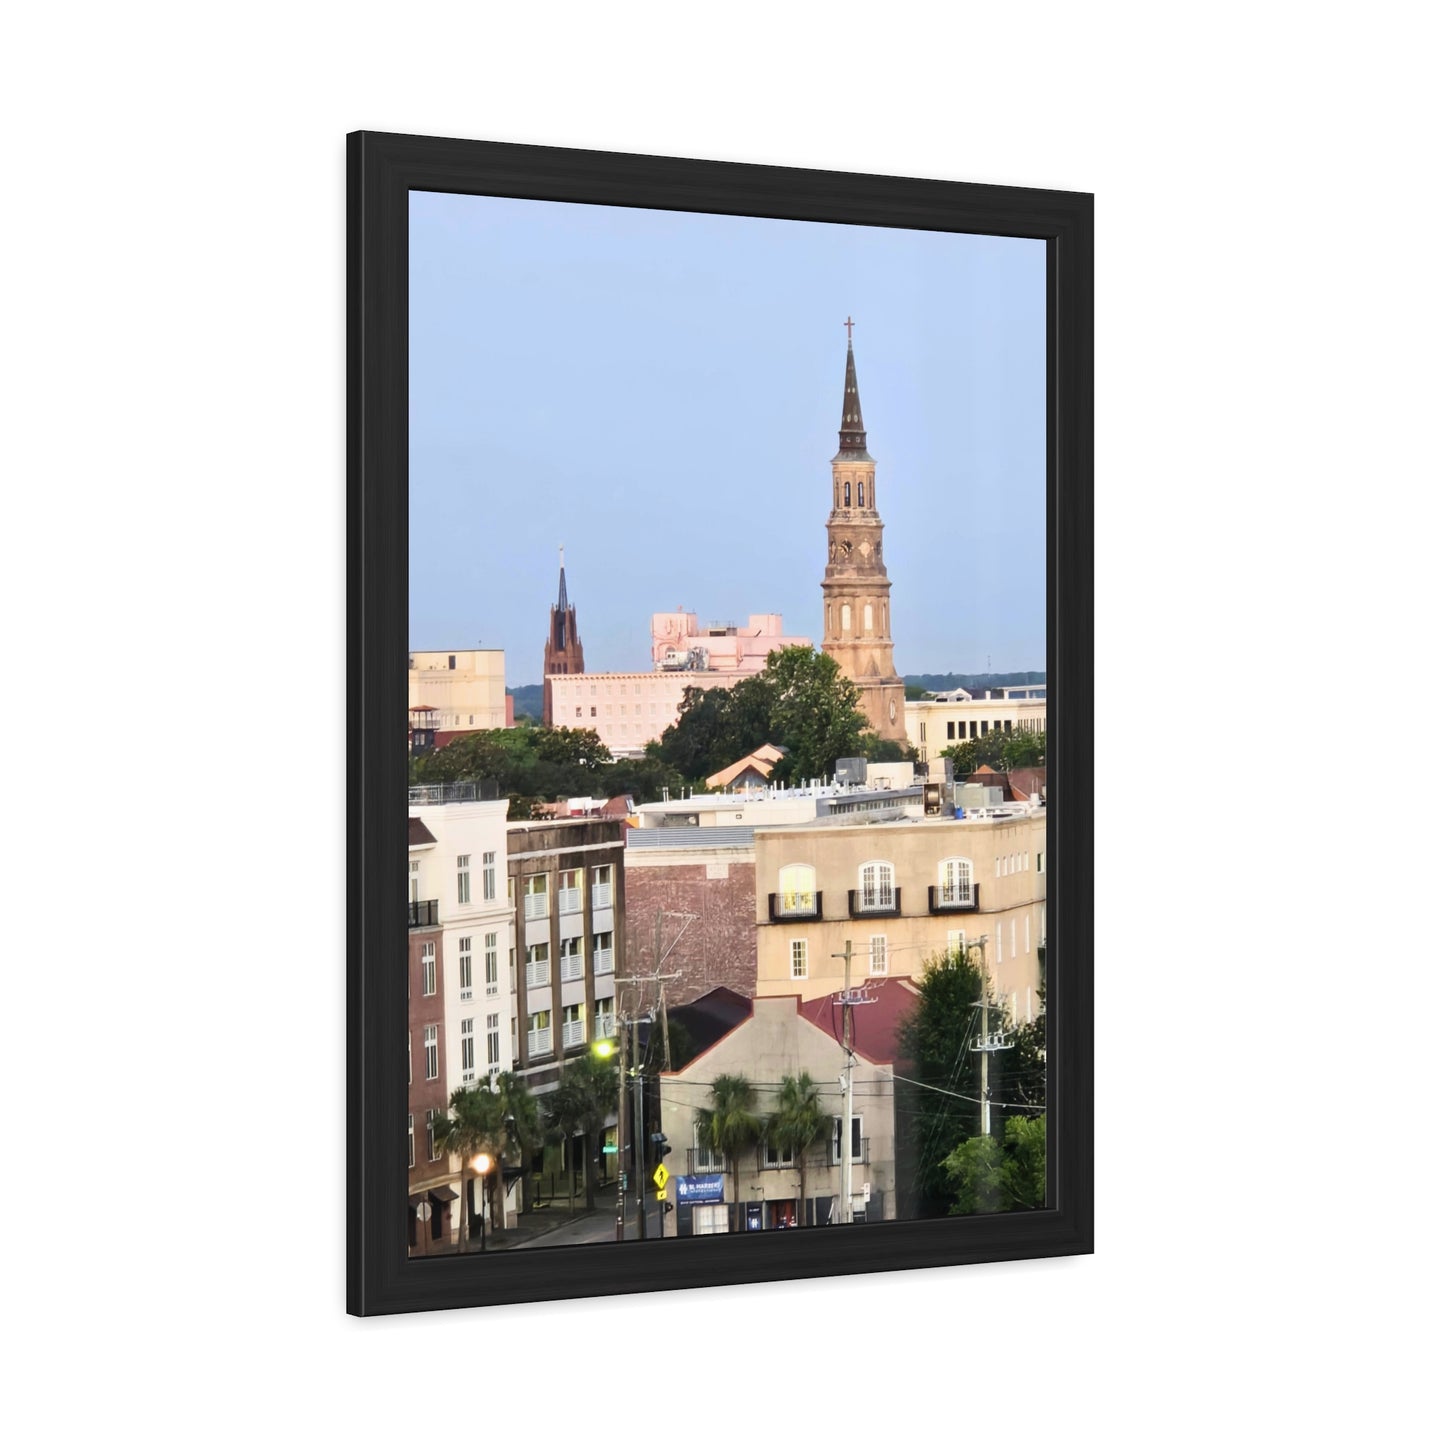 Wall art / poster of Charleston, SC with historical churches, side view.